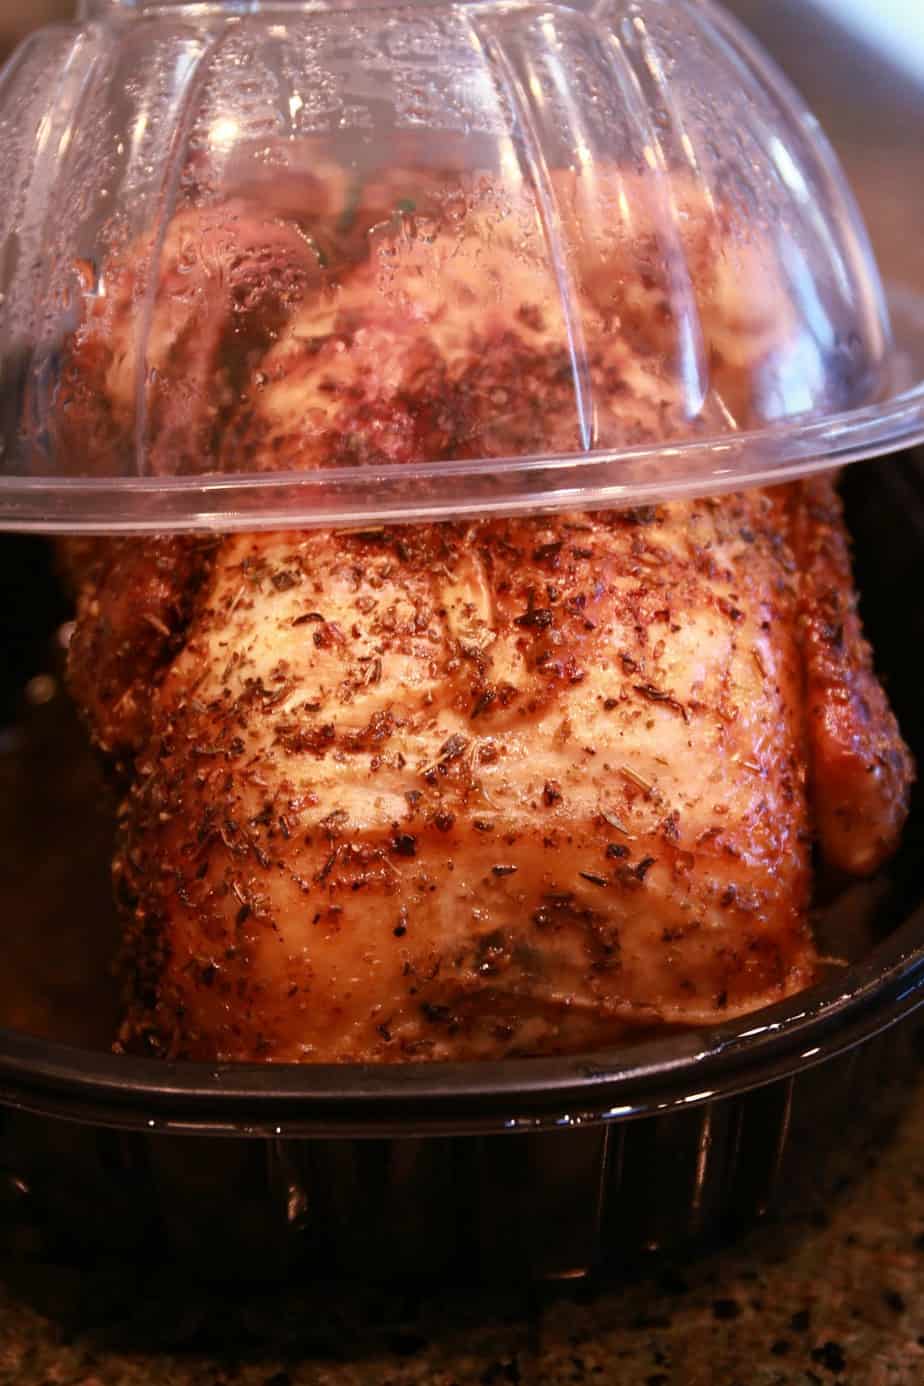 Picking up a rotisserie chicken is great for healthy dinner ideas